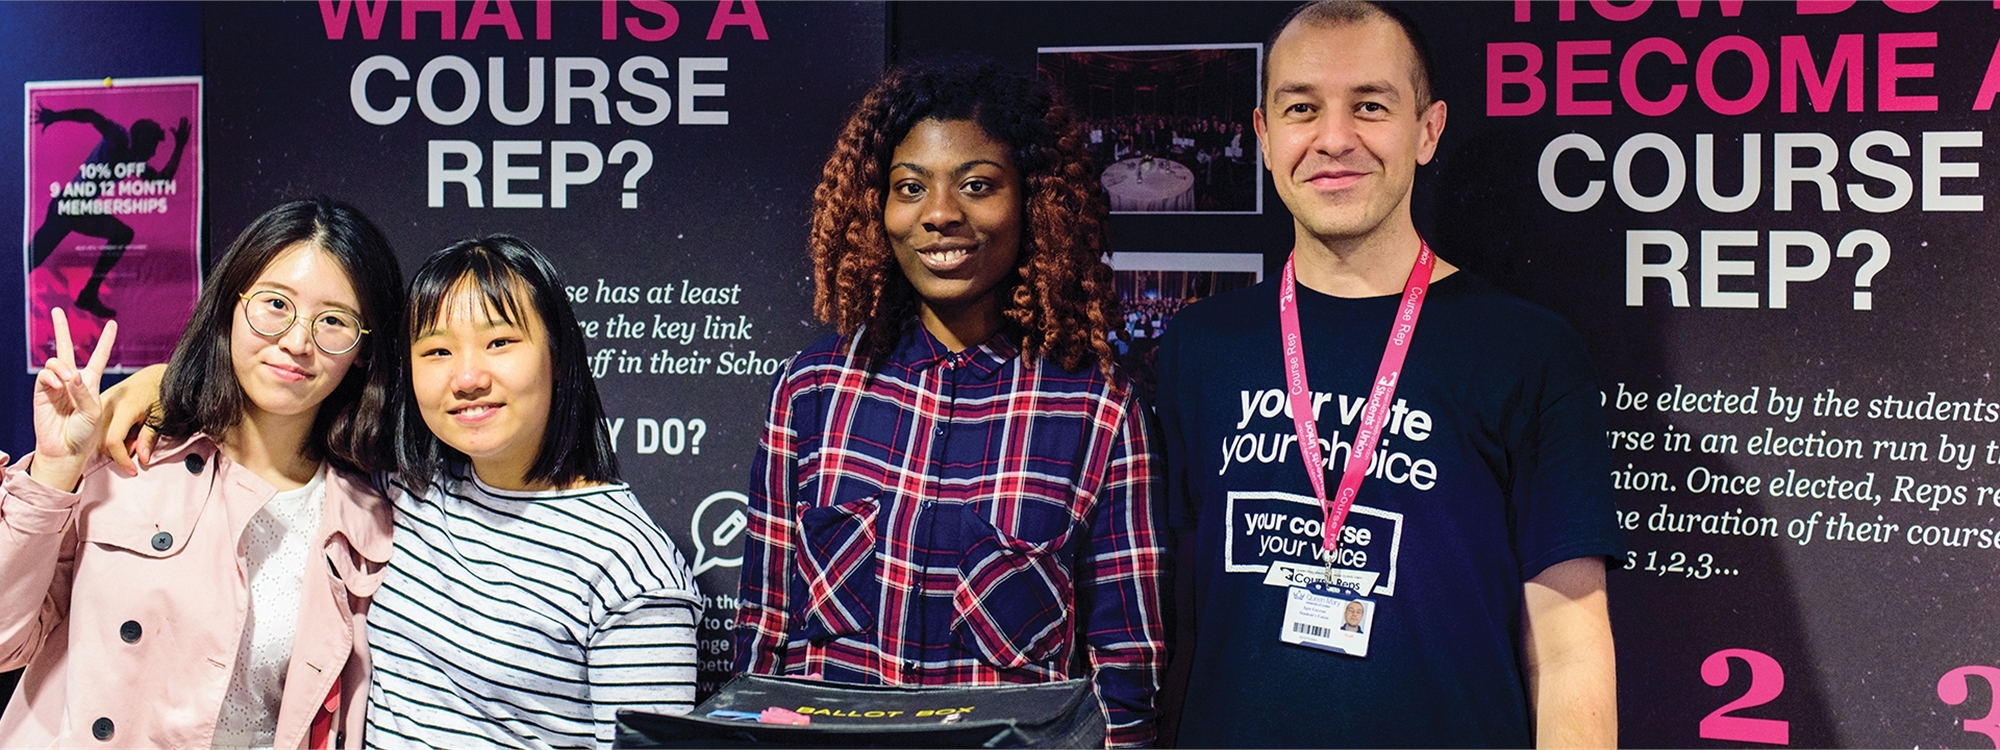 Every month we recognise and reward the hard work that our amazing Course Reps do! Find out more here.